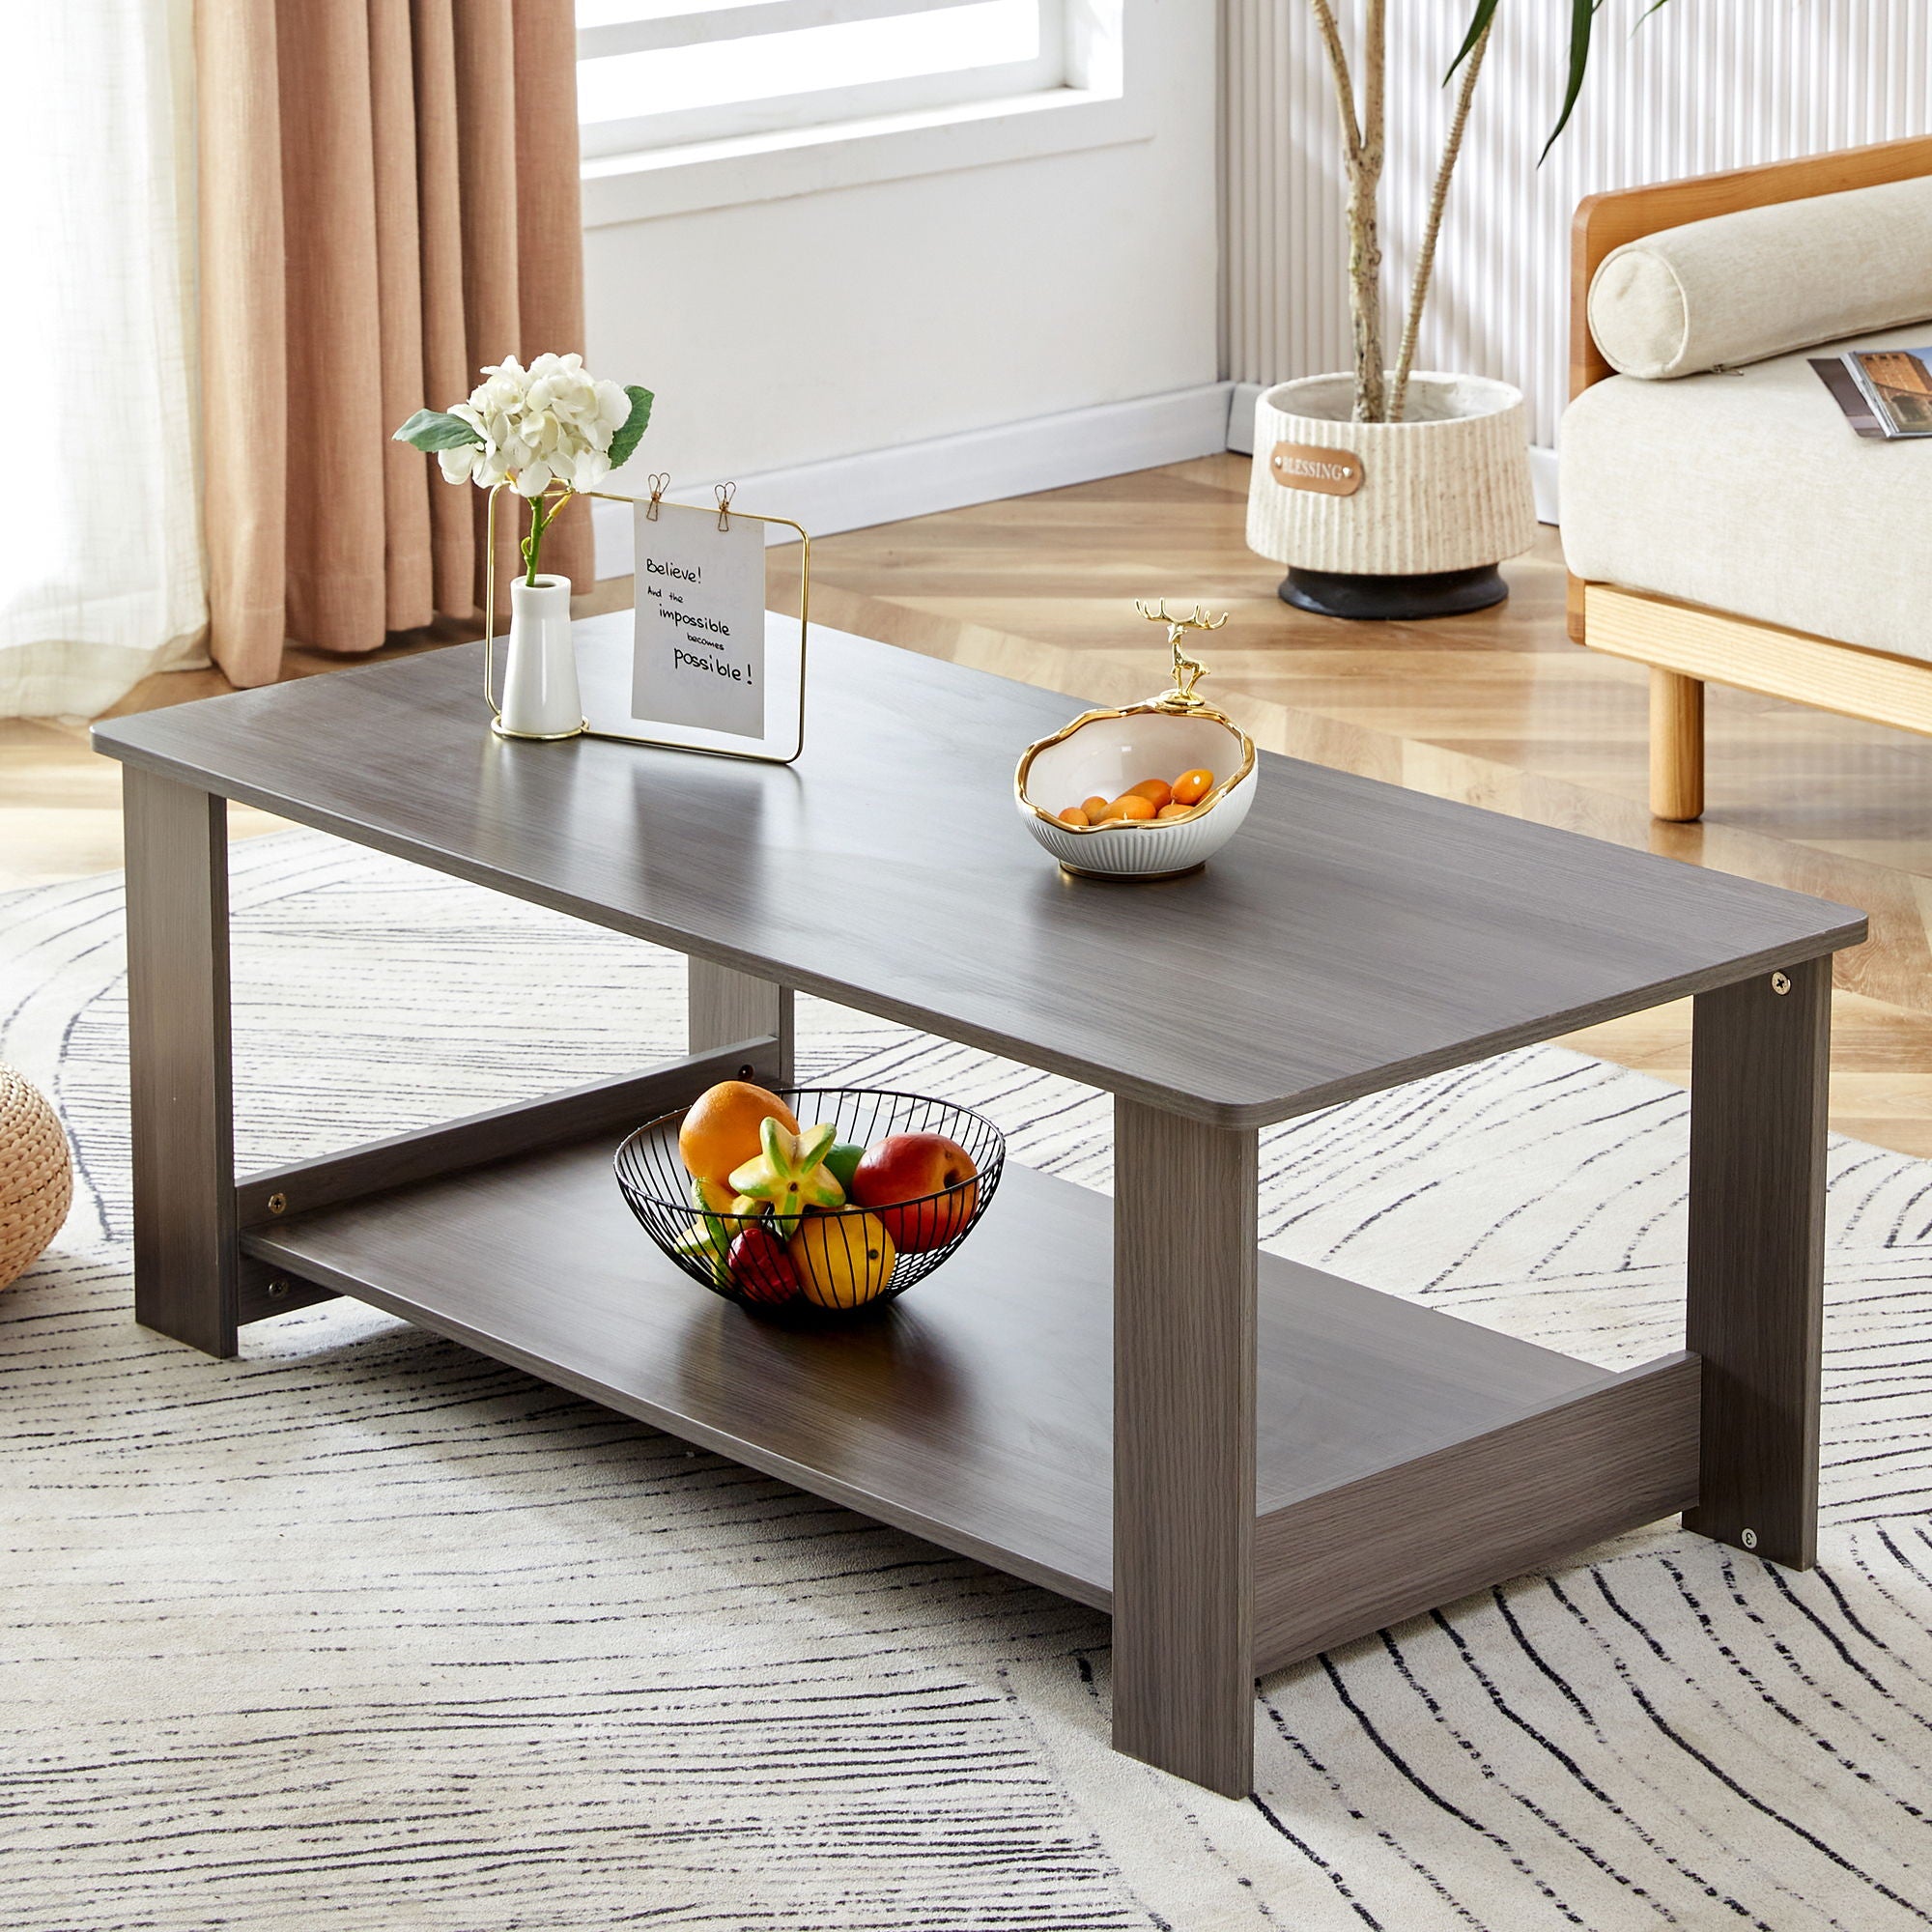 A Modern And Practical Gray Textured Coffee Table, Tea Table.Double Layered Coffee Table Made Of MDF Material, Suitable For Living Room, Bedroom And Study Room